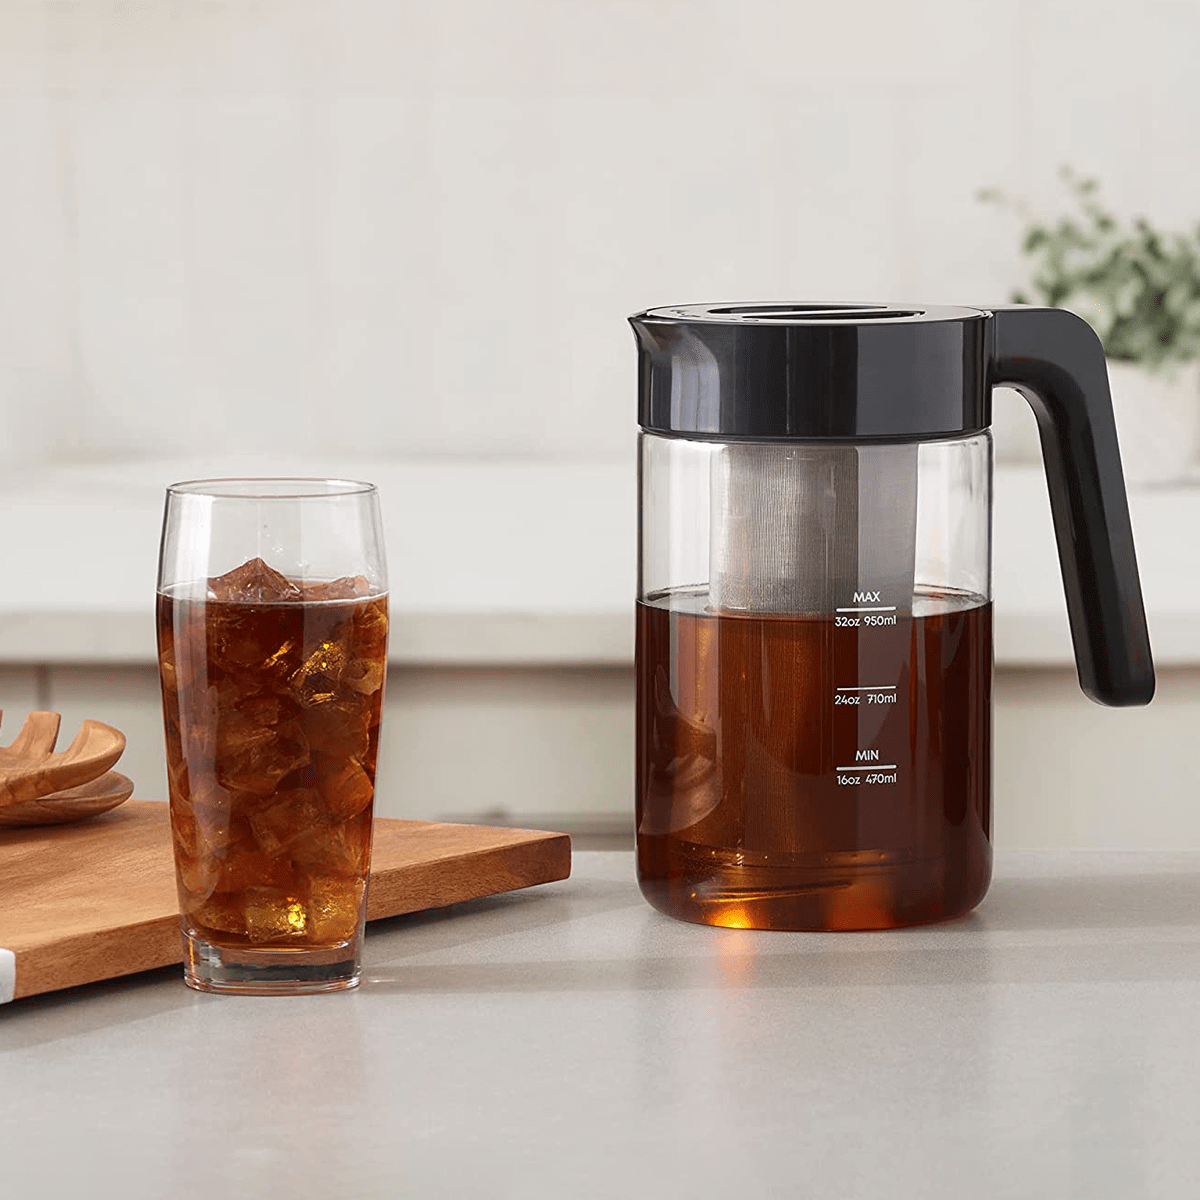 Takeya Cold Brew Coffee Maker review: This simple gadget makes